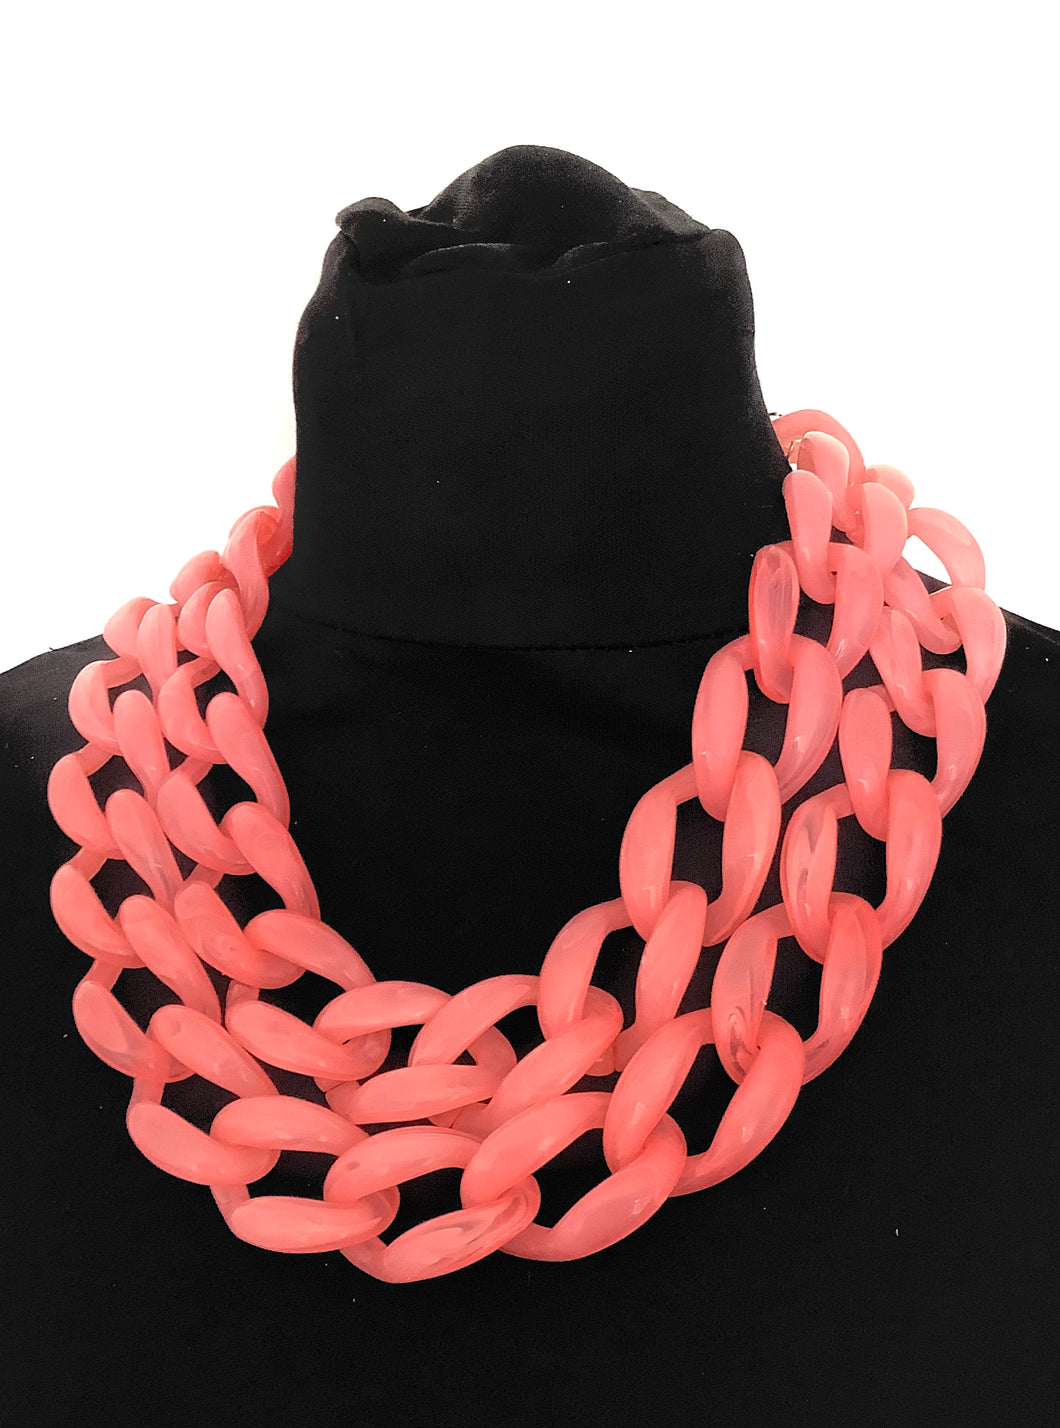 Pink Two Row Chain Statement Necklace